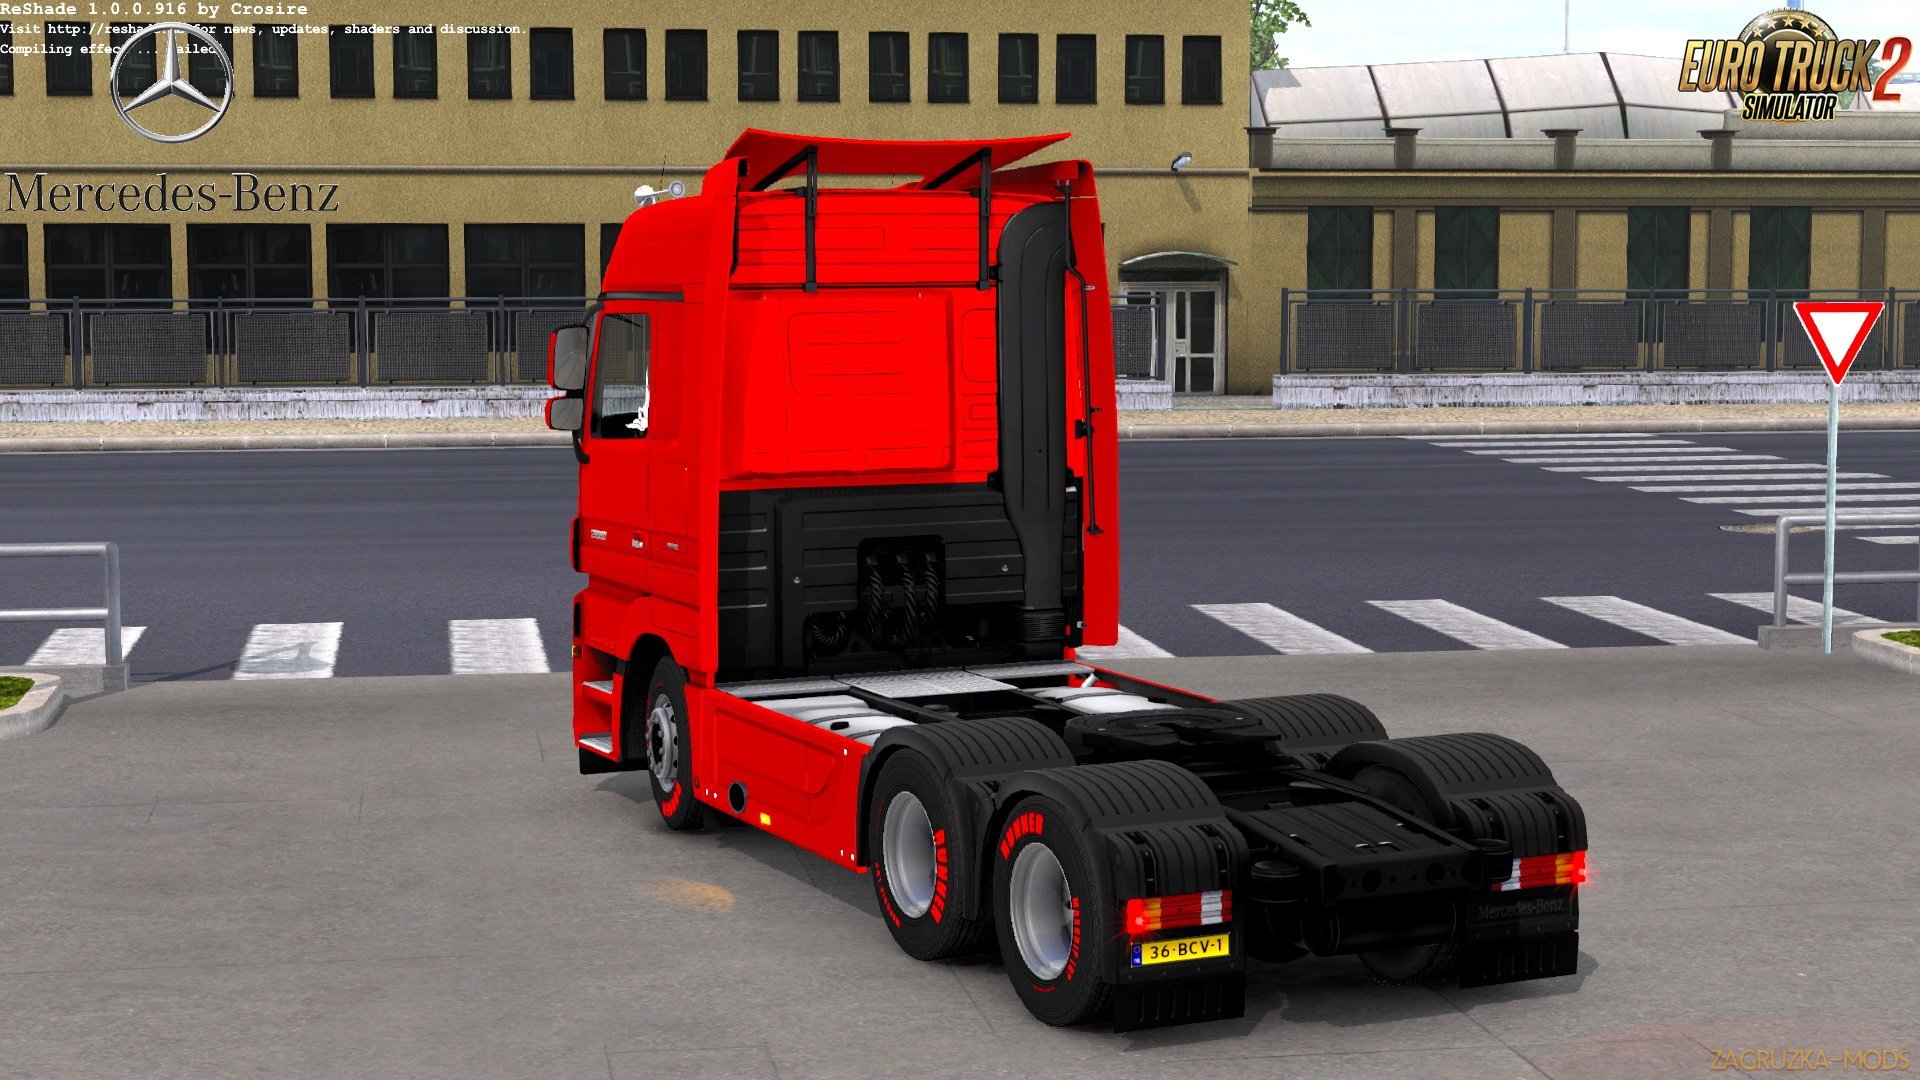 Mercedes Actros MP3 Reworked v1.8 by Schumi (1.30.x)